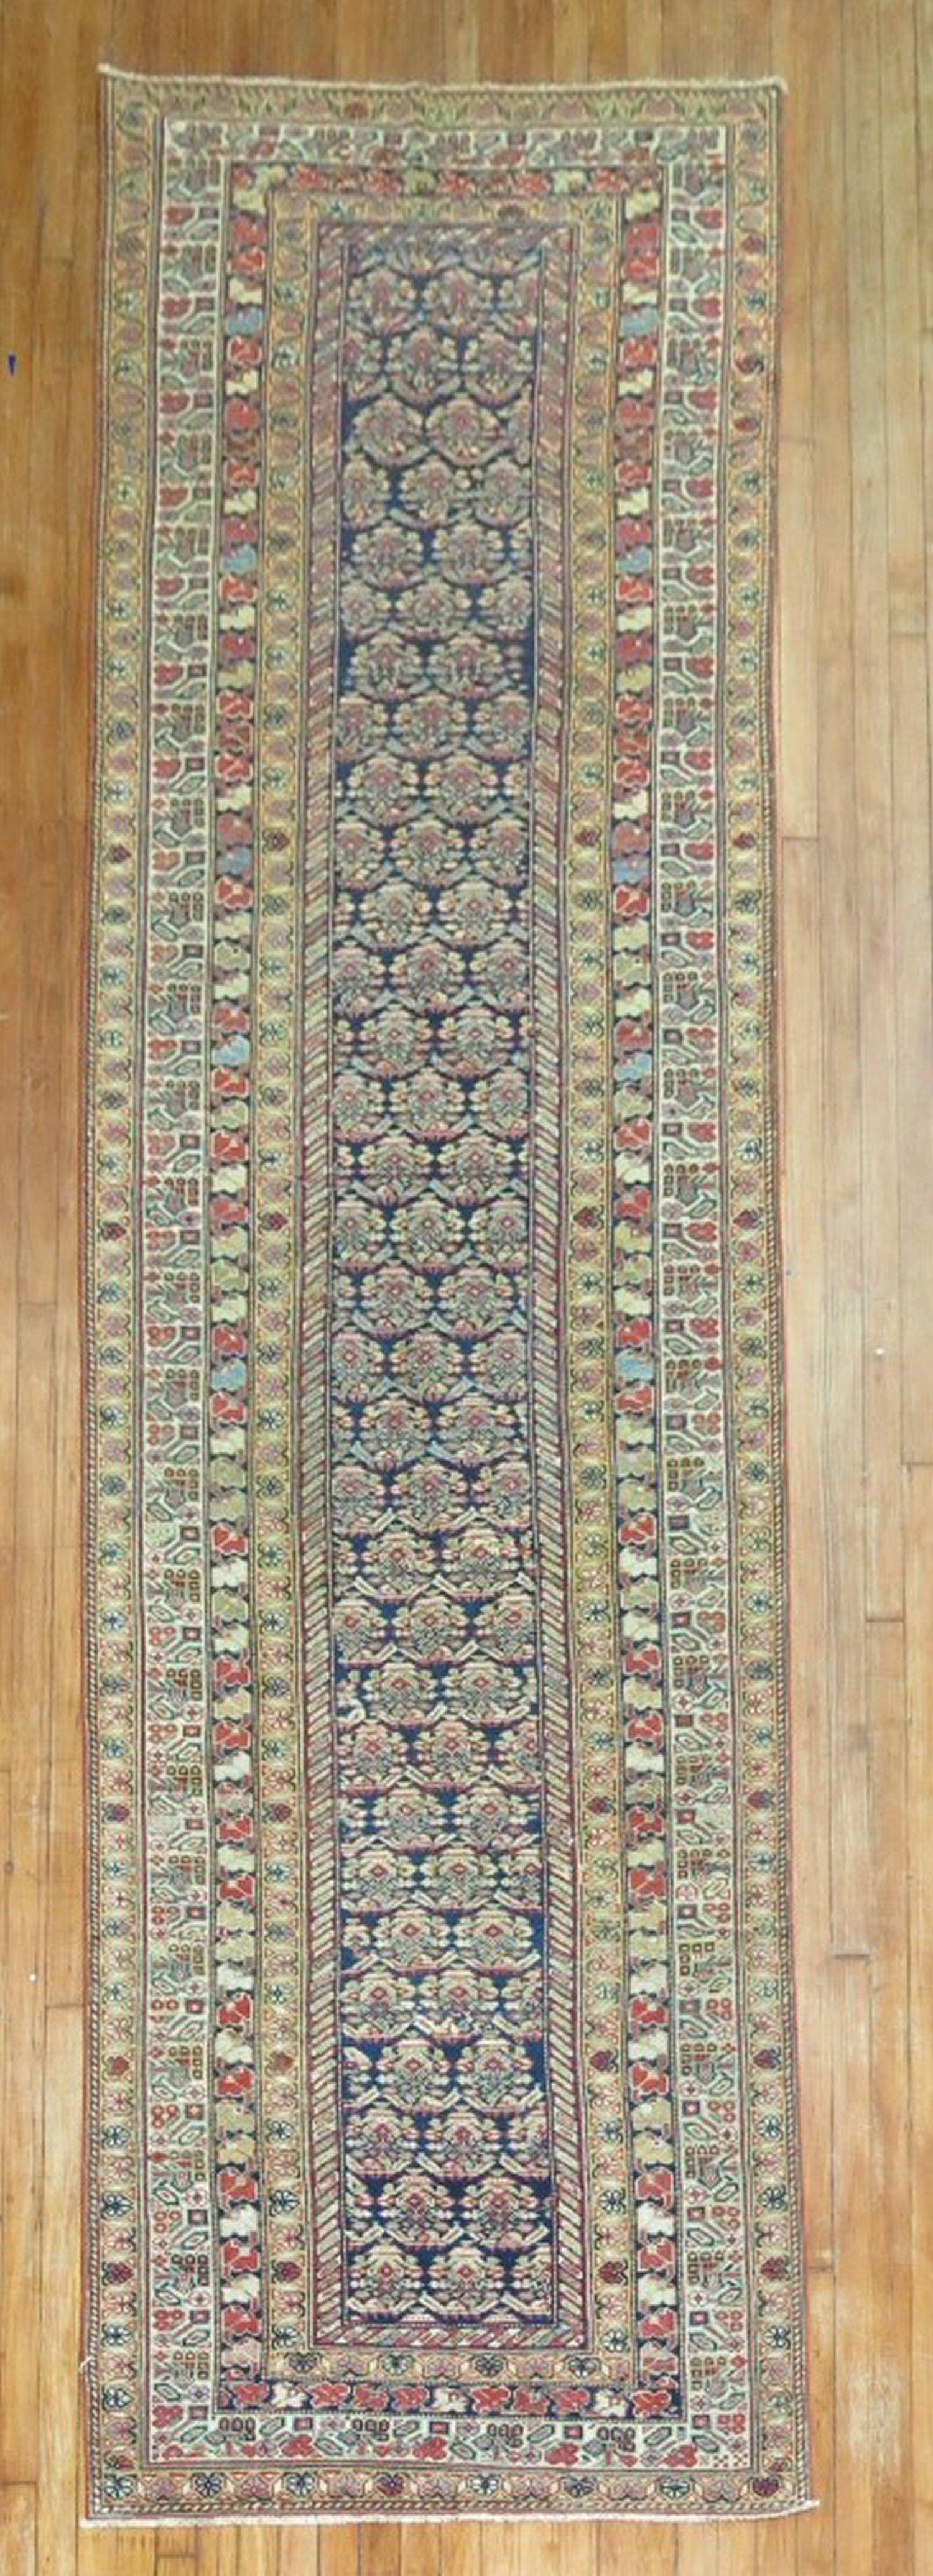 An authentic early 20th century Fine Persian Ferehan runner sporting a classic repetitive paisley motif on a navy field. 

Measures: 3'6